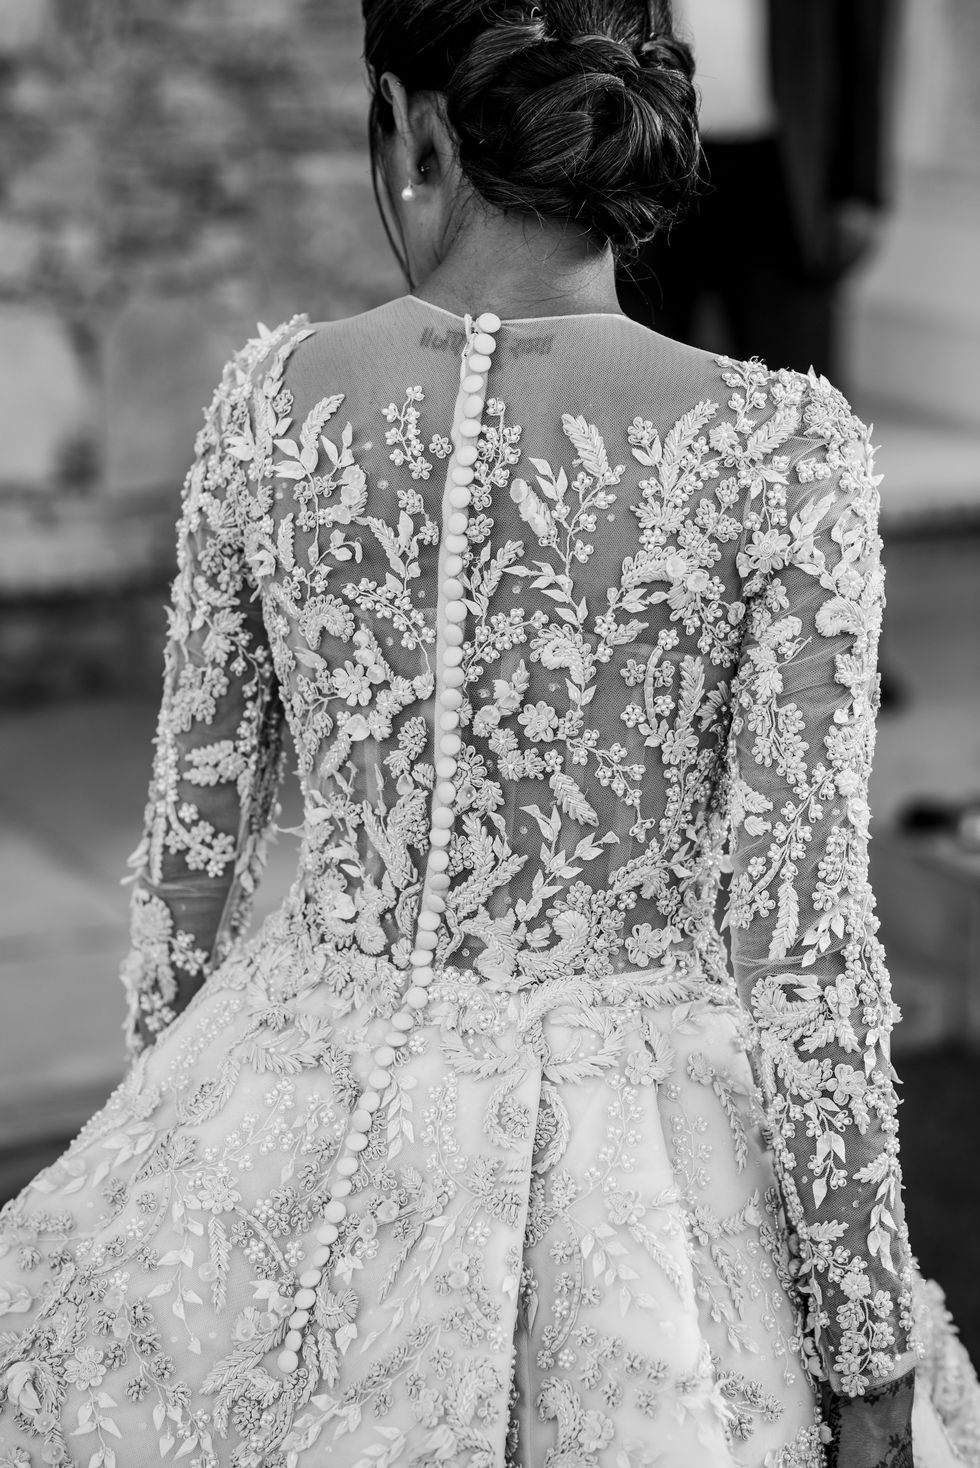 White, Clothing, Dress, Lace, Shoulder, Fashion, Gown, Black-and-white, Wedding dress, Haute couture, 